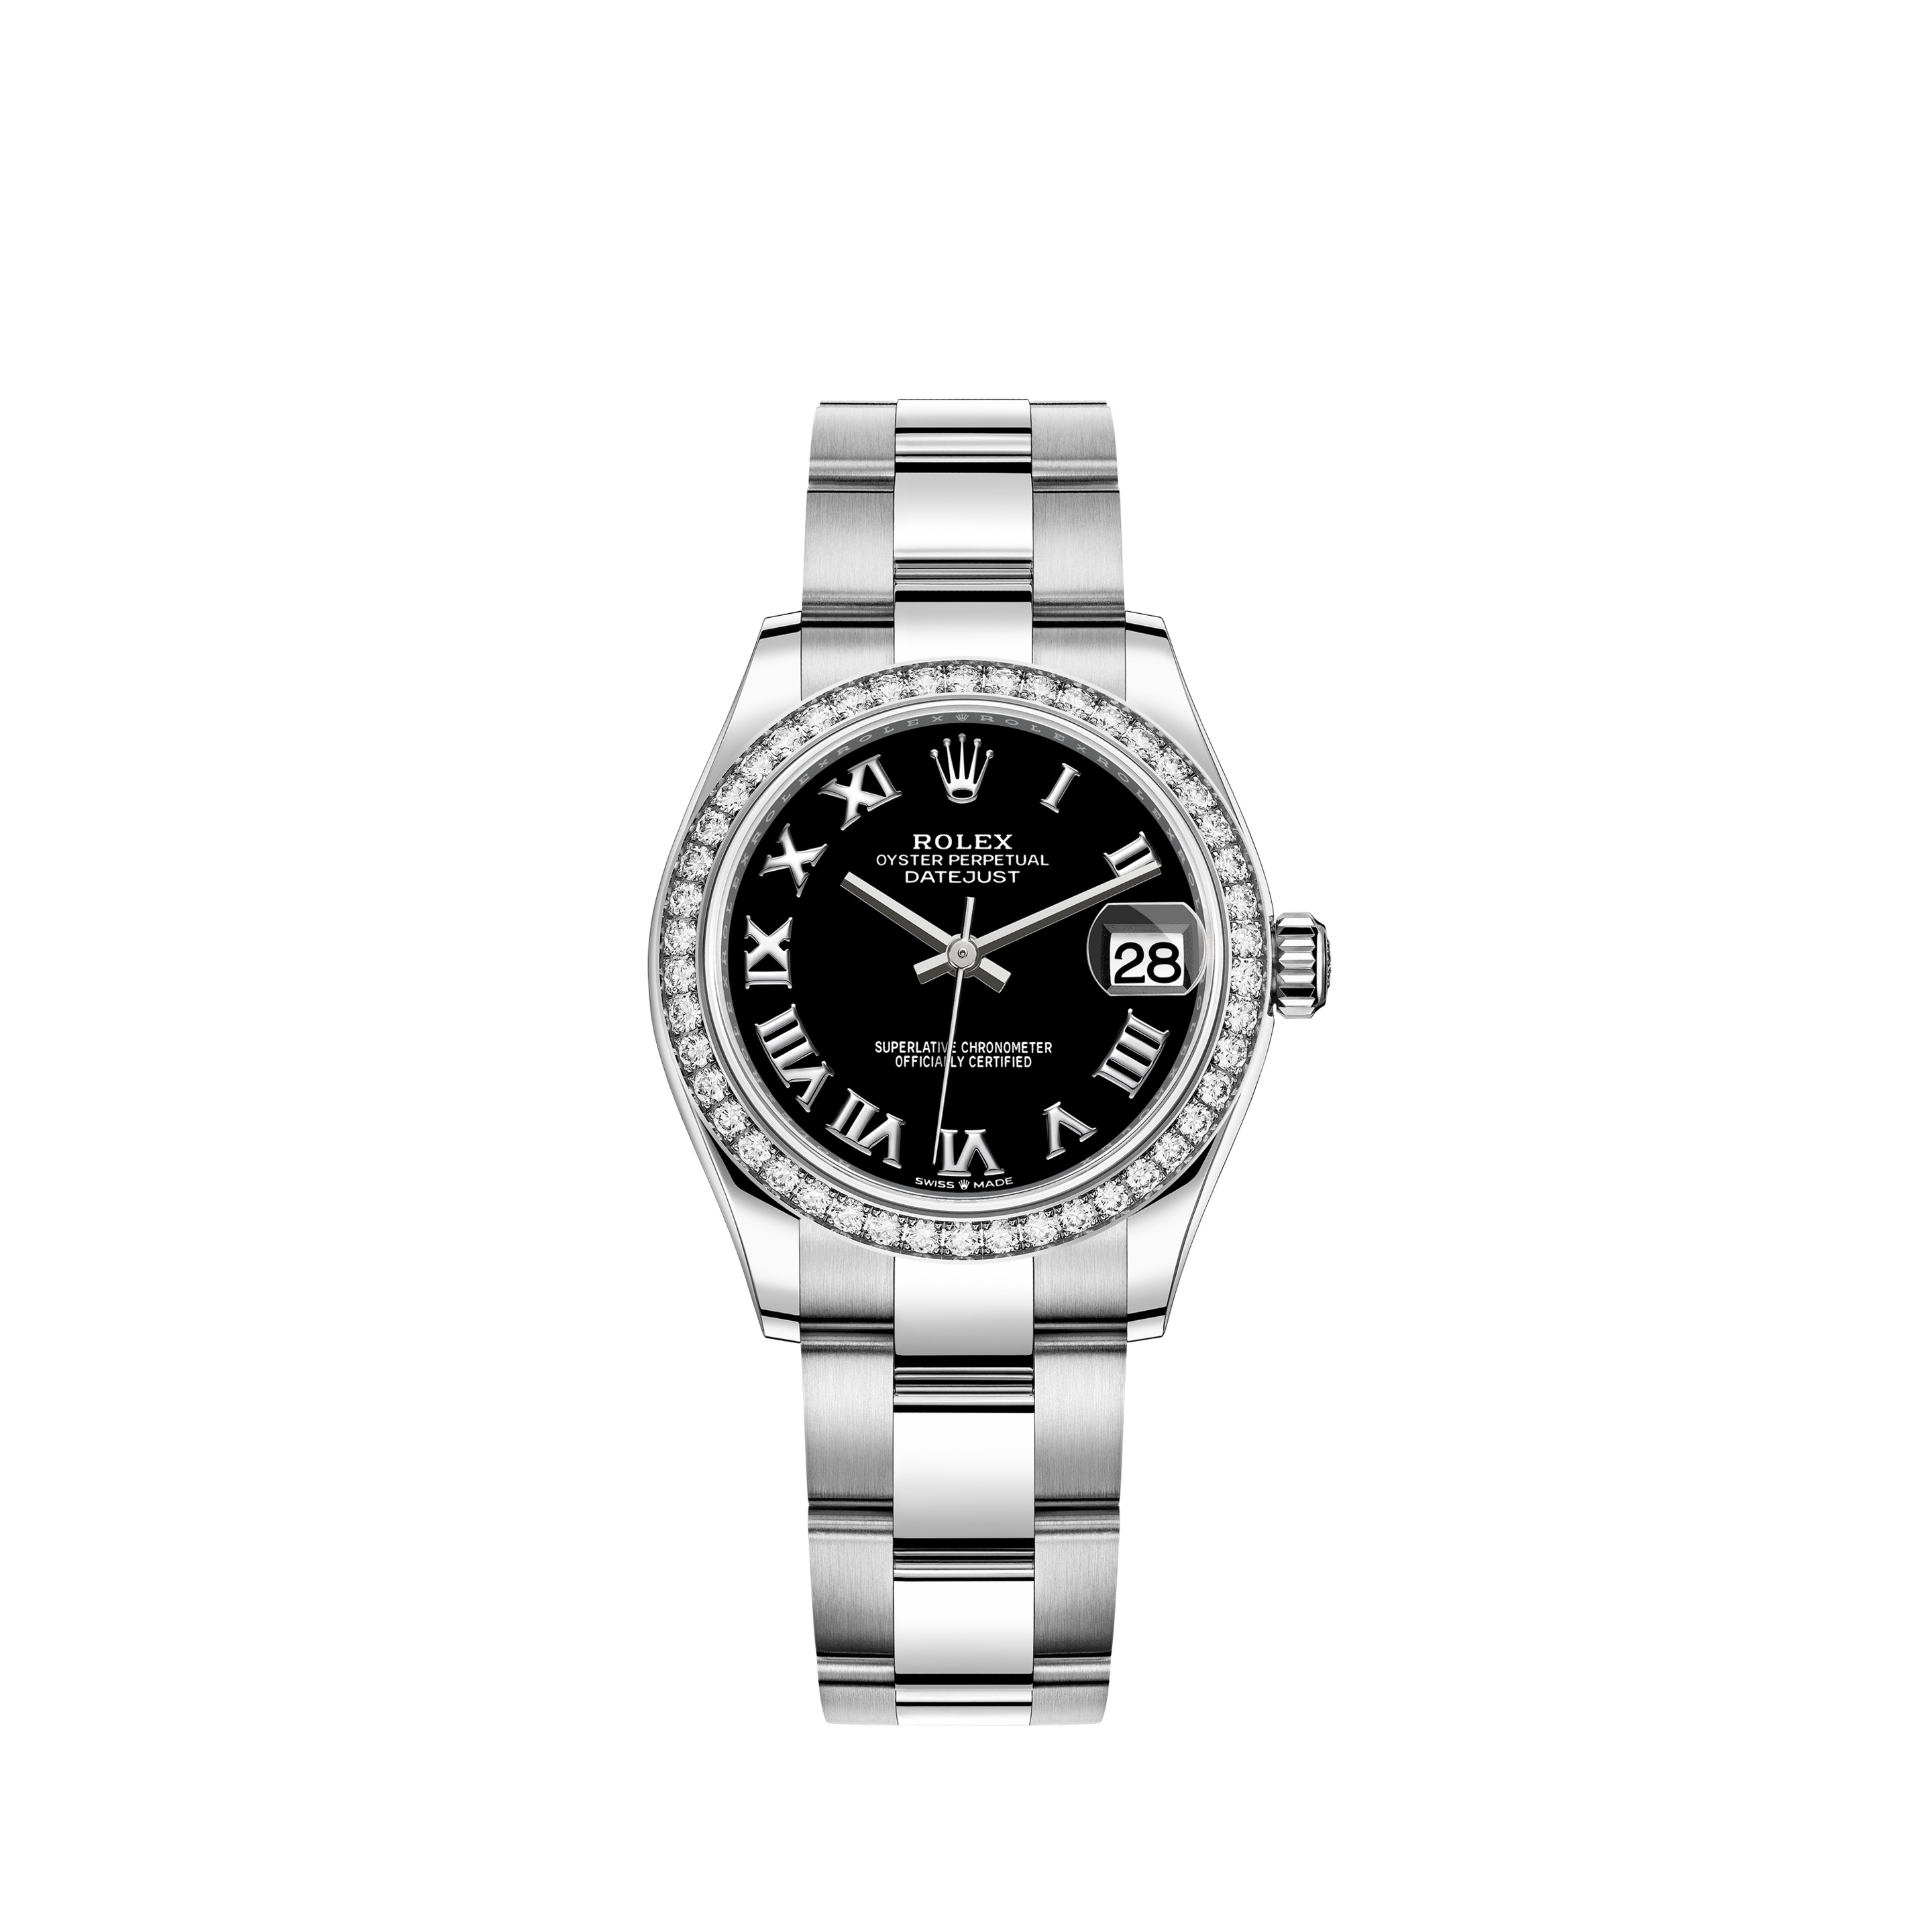 Datejust 31 278384RBR White Gold & Stainless Steel Watch (Bright Black)